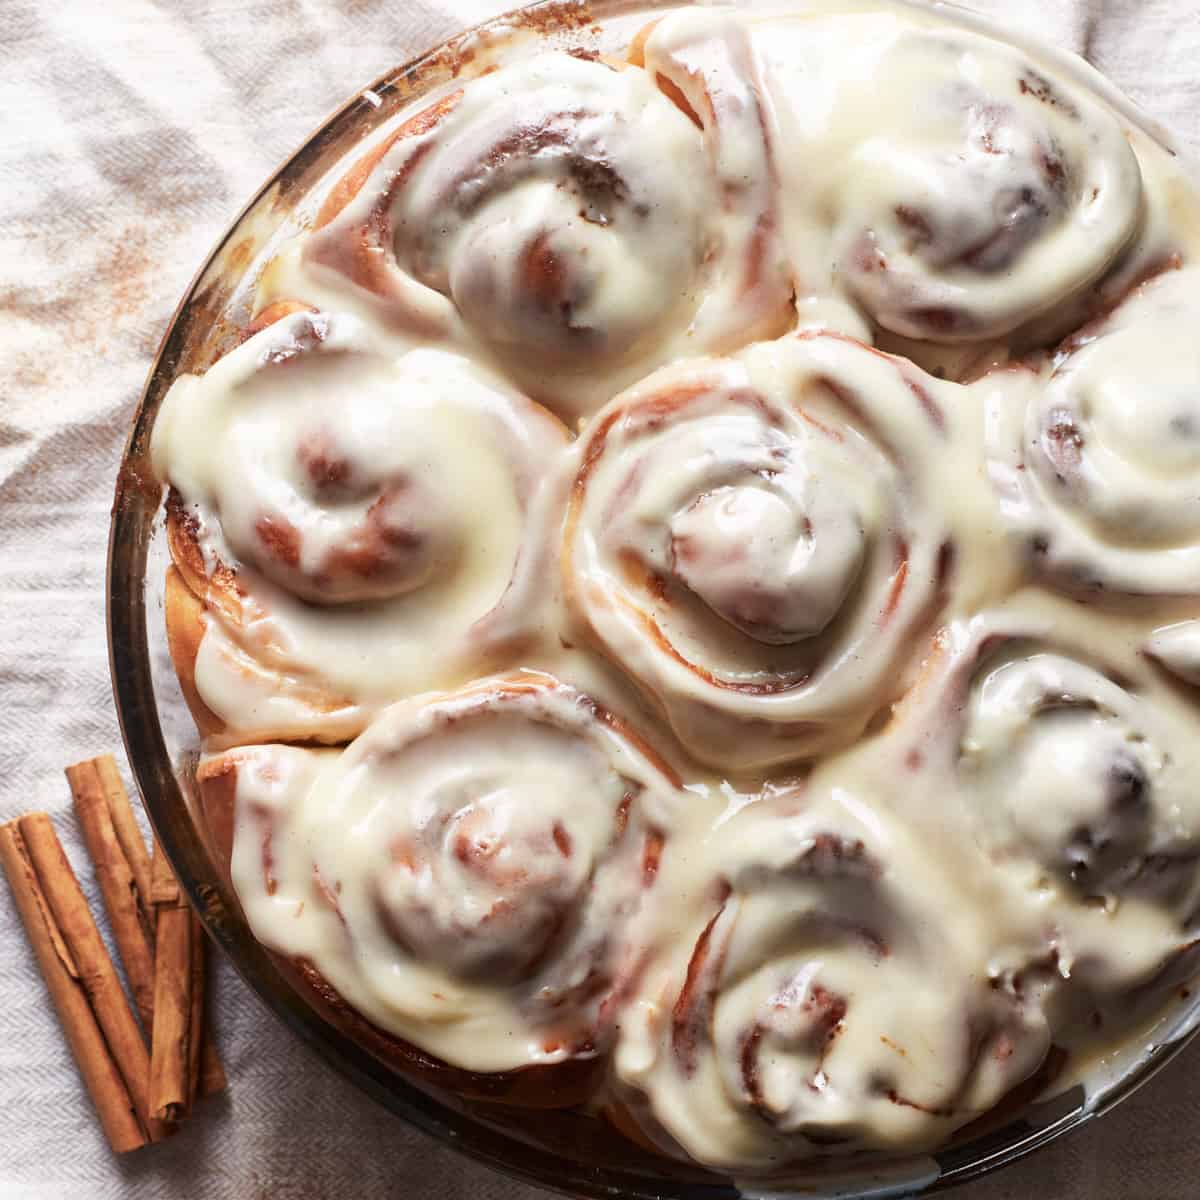 Baked and frosted cinnamon rolls in a round baking dish